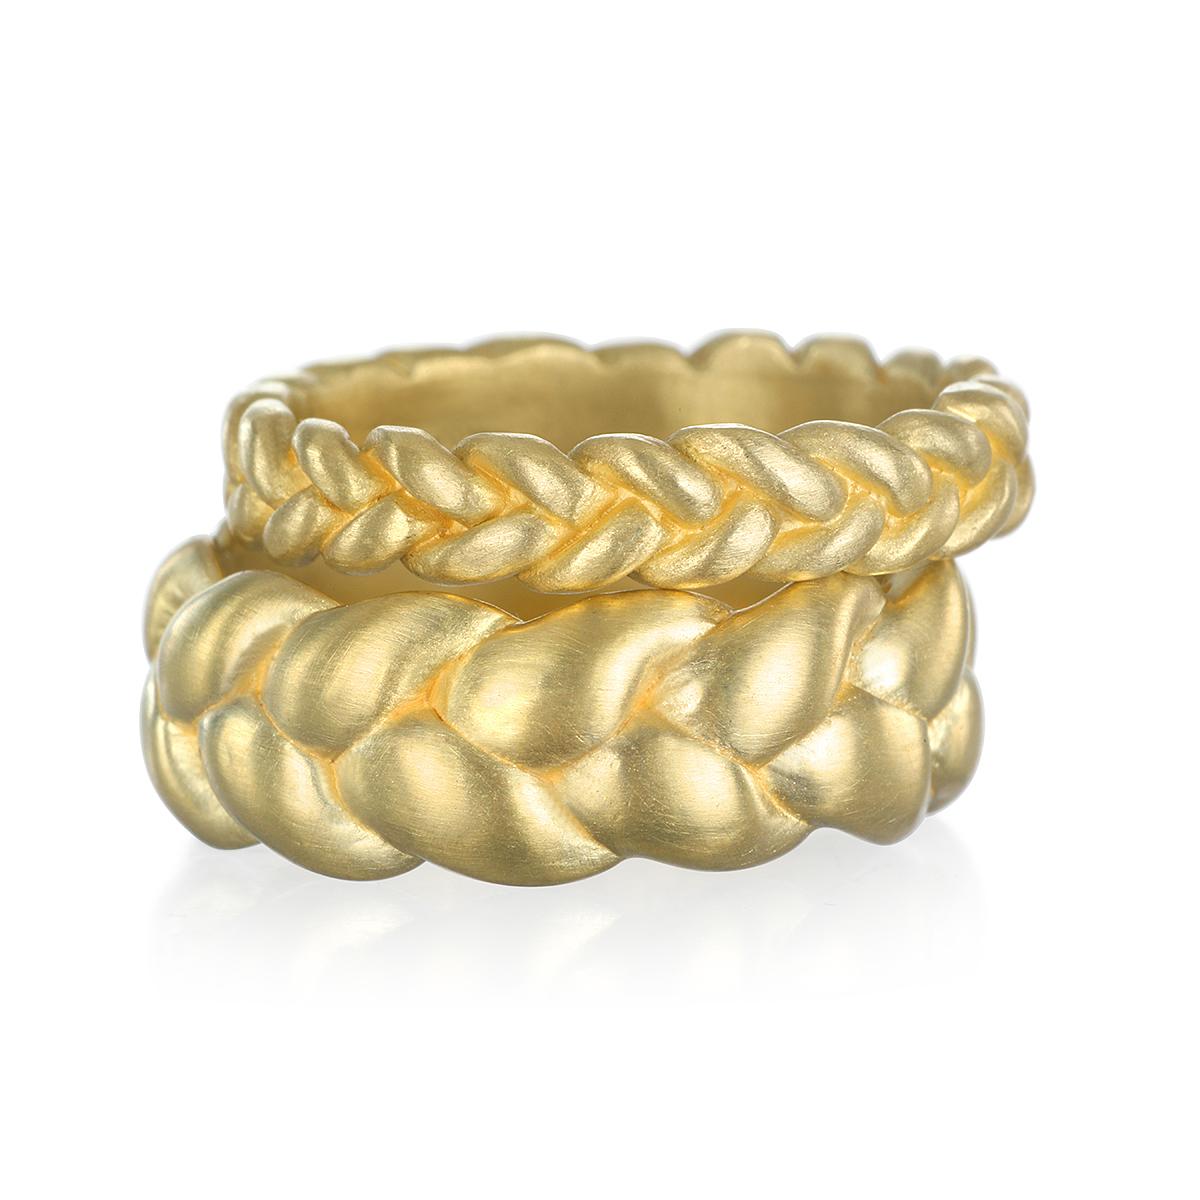 18K Gold Braided Ring
Individually or together, this set of handmade rings is the look that it is stacked up to be! Classic beauty, understated confidence, and pure style.

WB55  Chunky 5/16 inch wide - $2,700
WB75 Thin 3/16 inch wide - $1,495

This